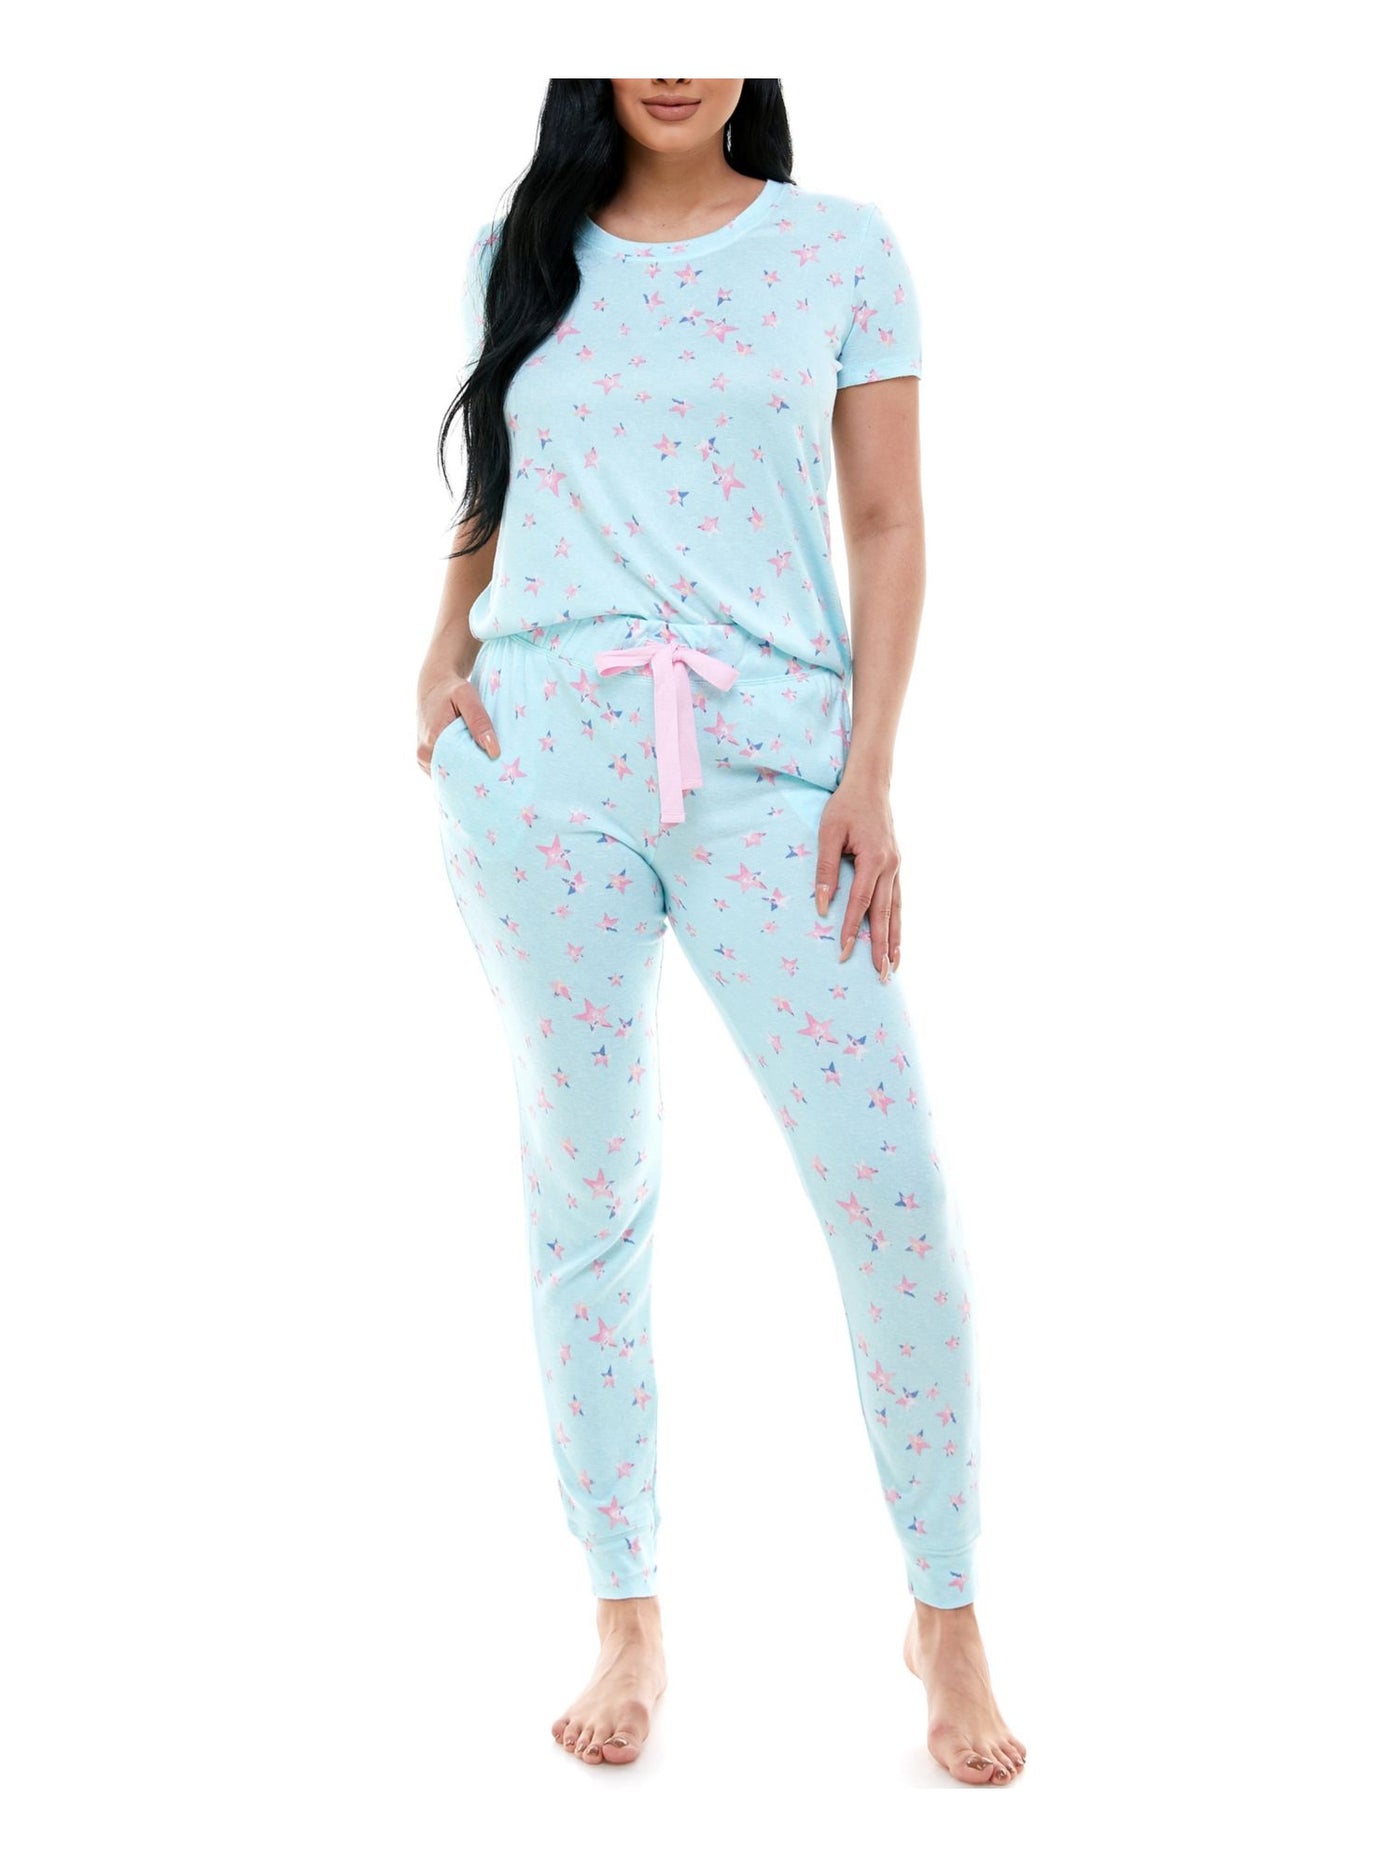 JACLYN INTIMATES Womens Light Blue Printed Stretch T-Shirt Top Lounge Pants Pajamas S